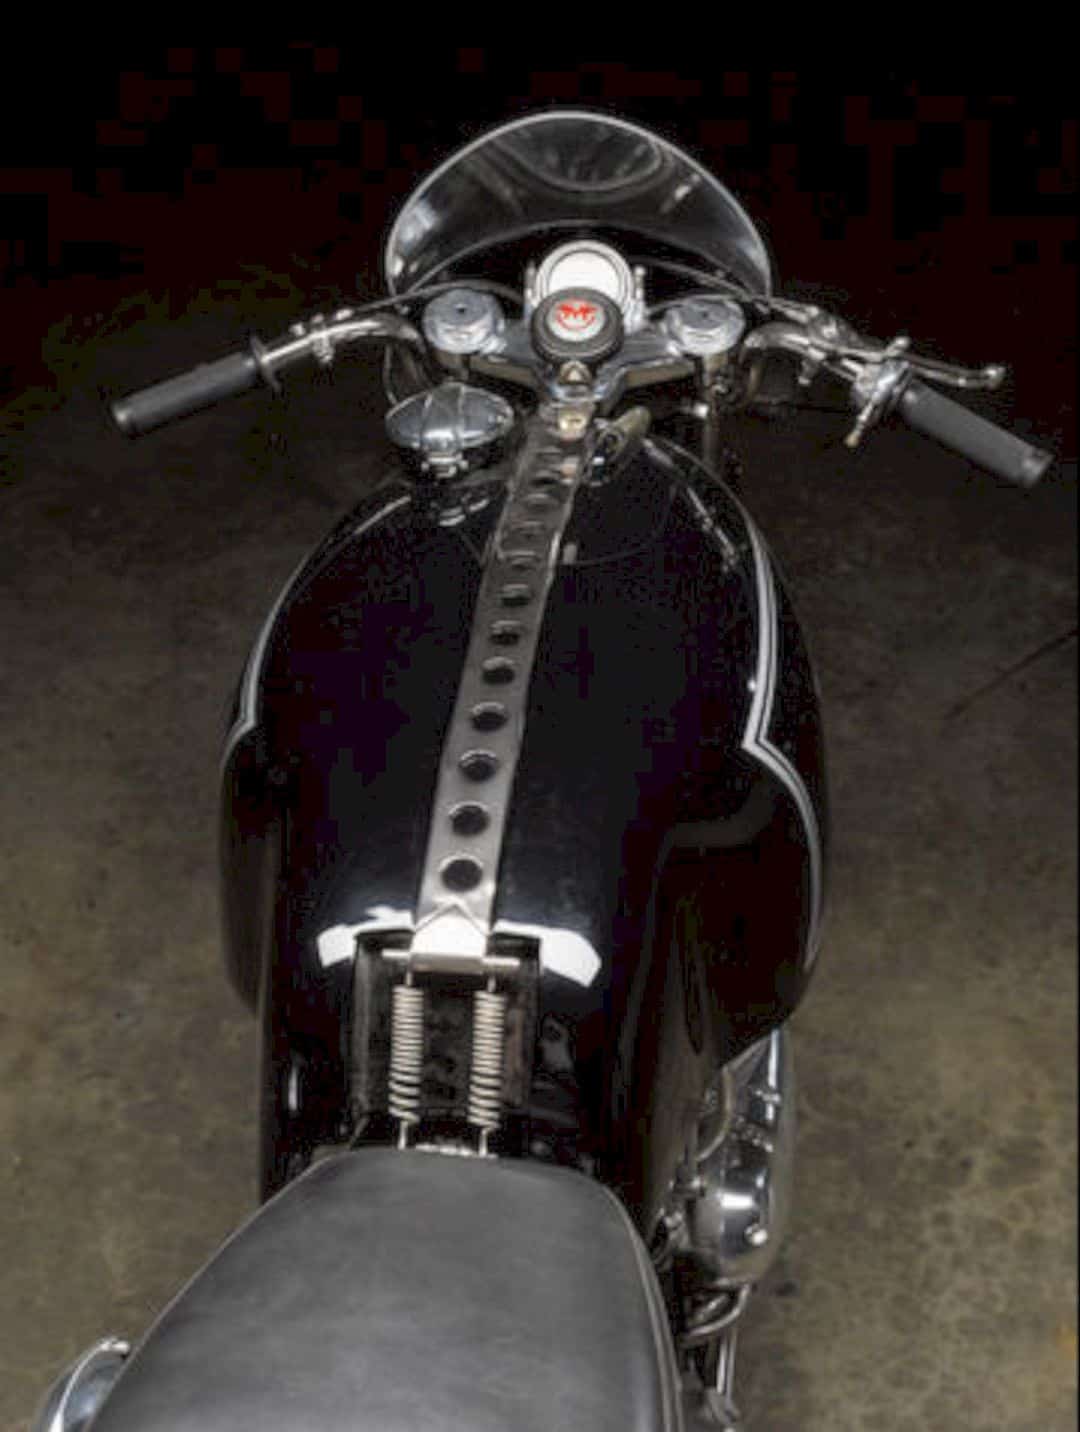 The 1955 Matchless 498cc G45 Motorcycle 8